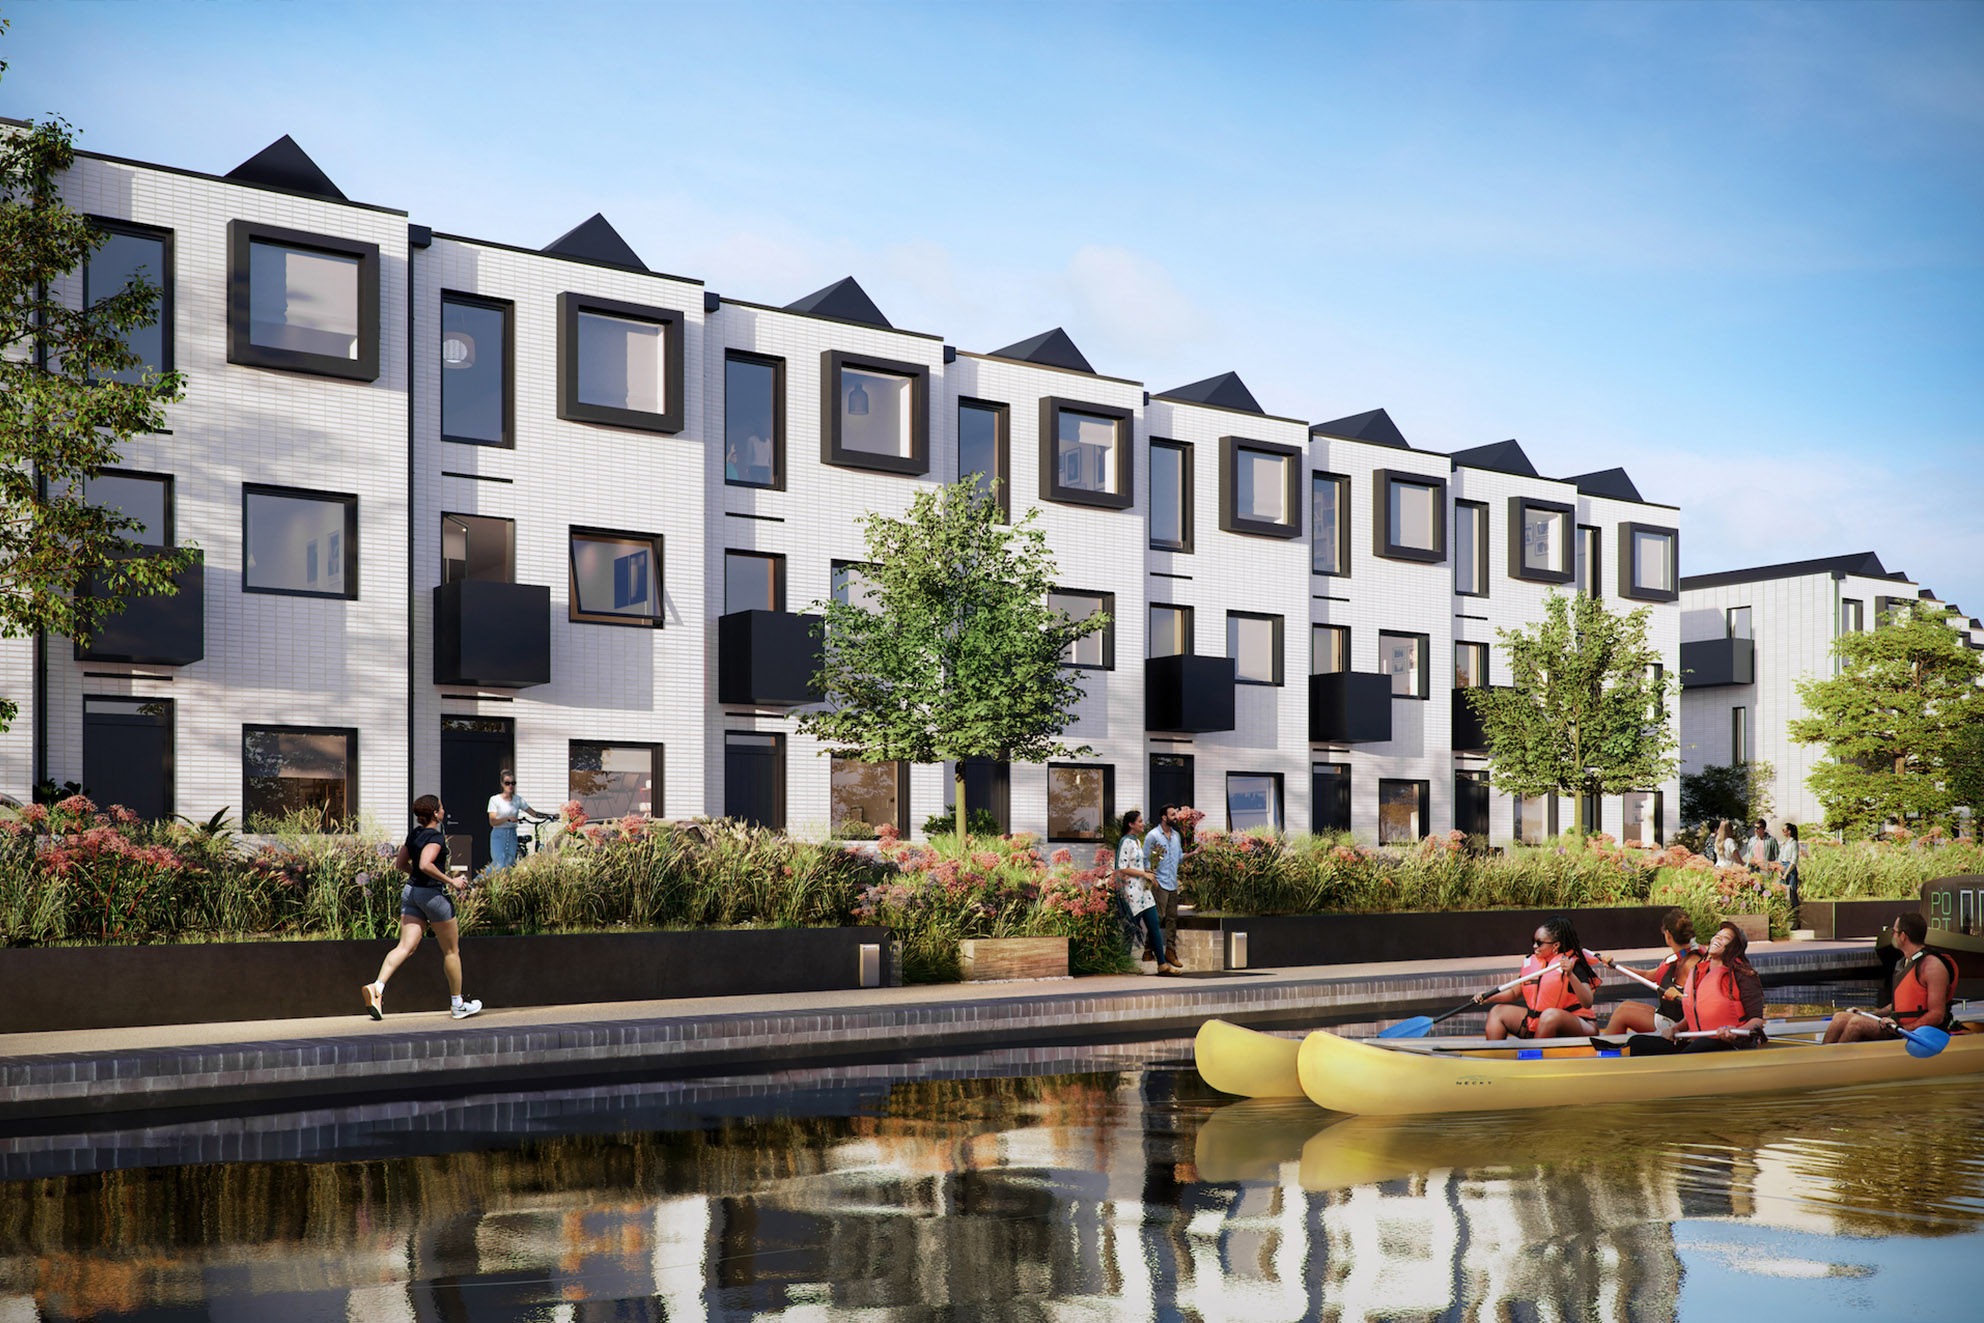 Urban Splash, the developers of the new Port Loop canal-side community in Edgbaston Birmingham will be part of the West Midlands delegation at MIPIM